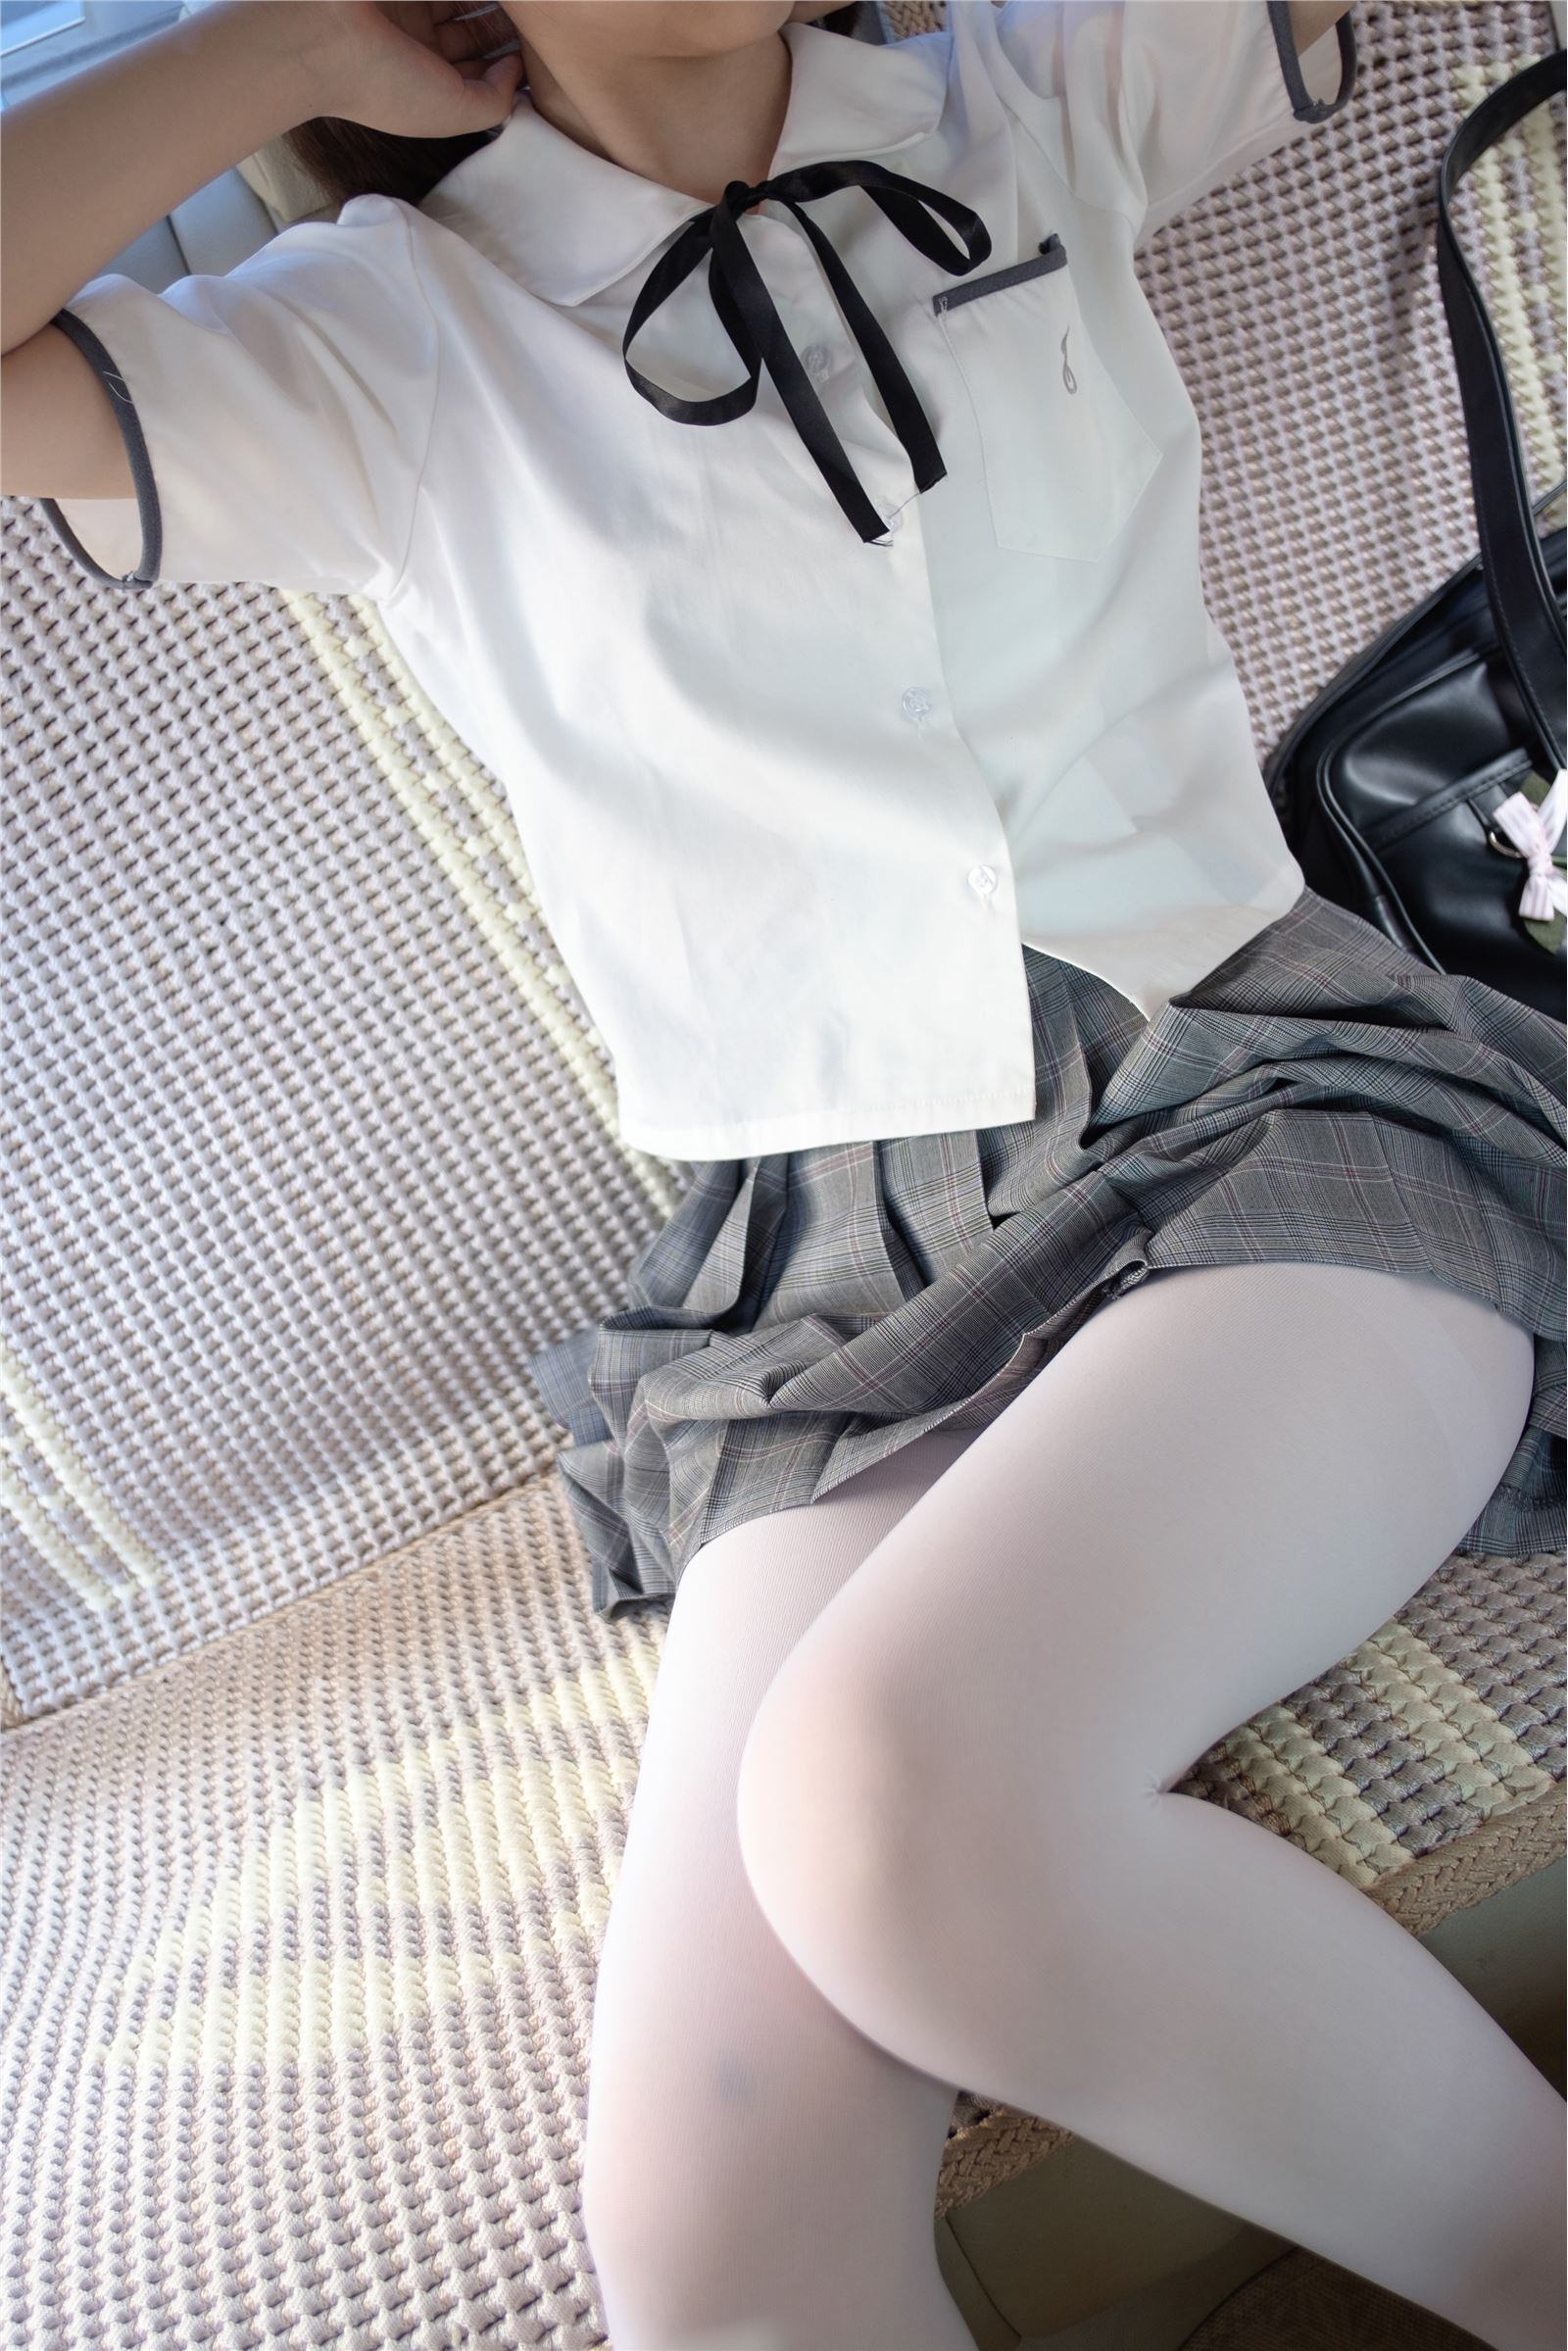 Cosplay collection 02